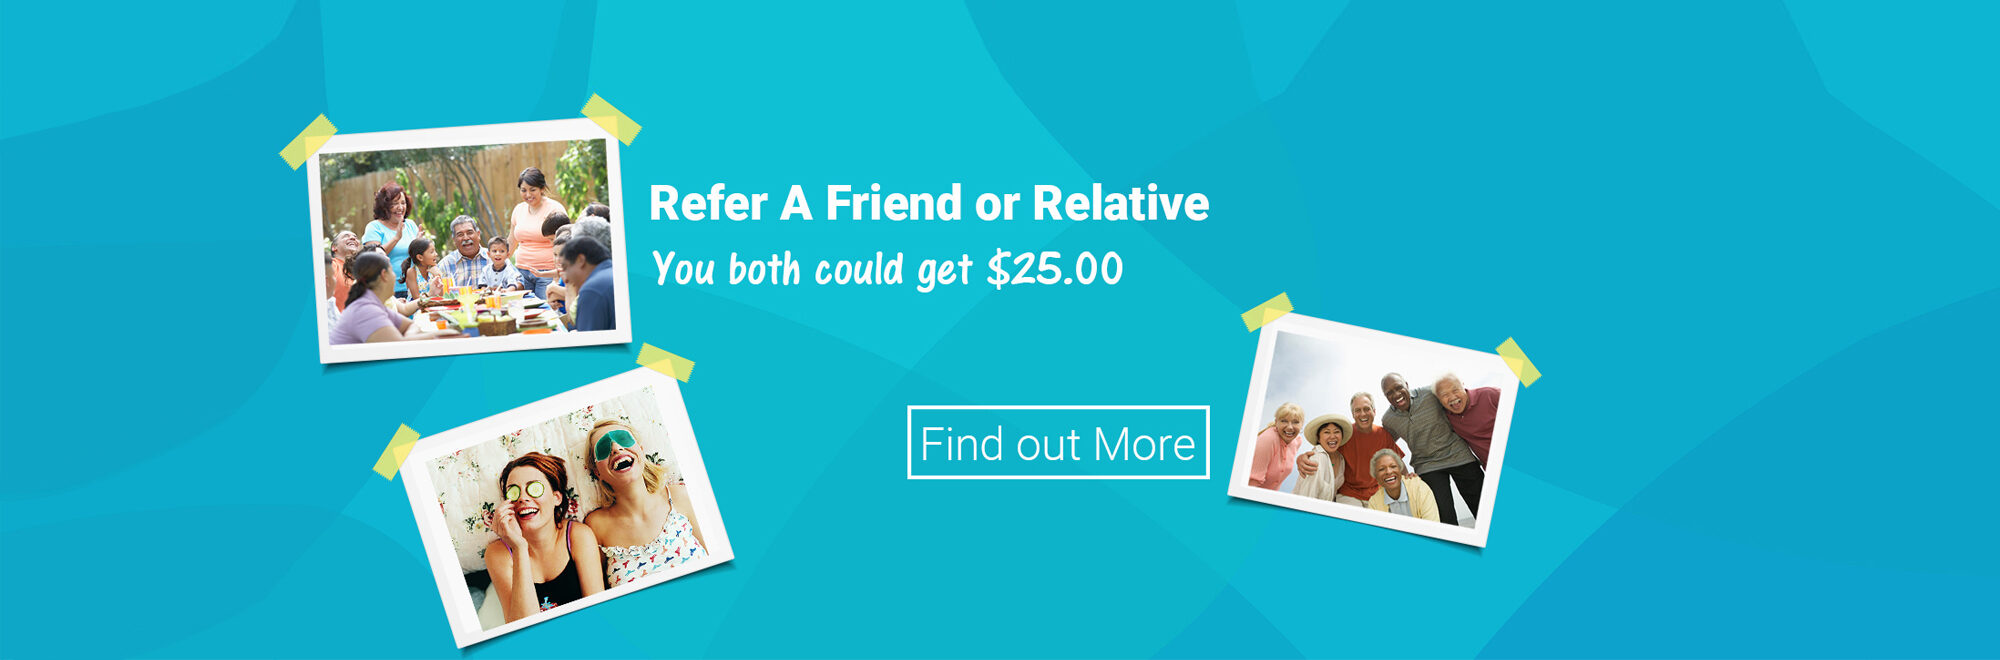 Refer a Friend or Relative!